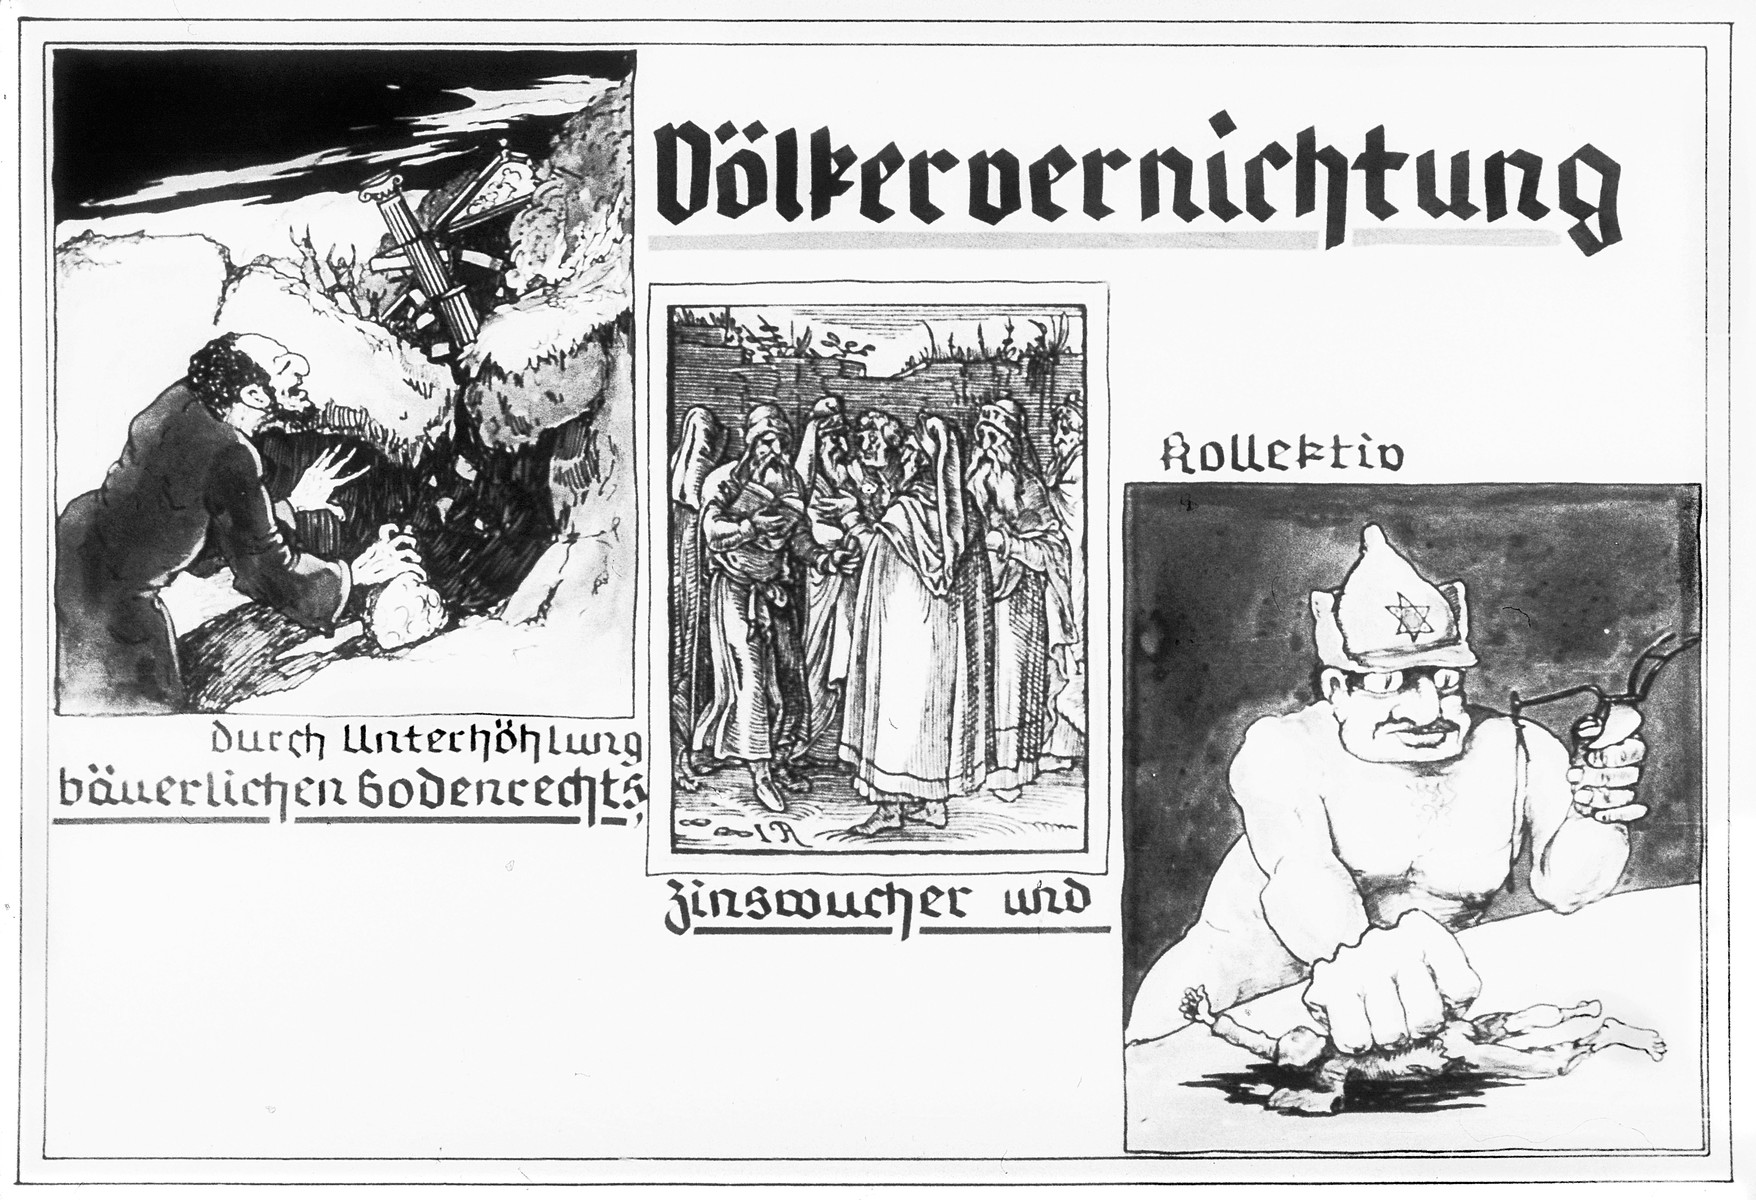 Propaganda slide entitled "Destruction of peoples through undermining peasant land laws, usury and collectivization."